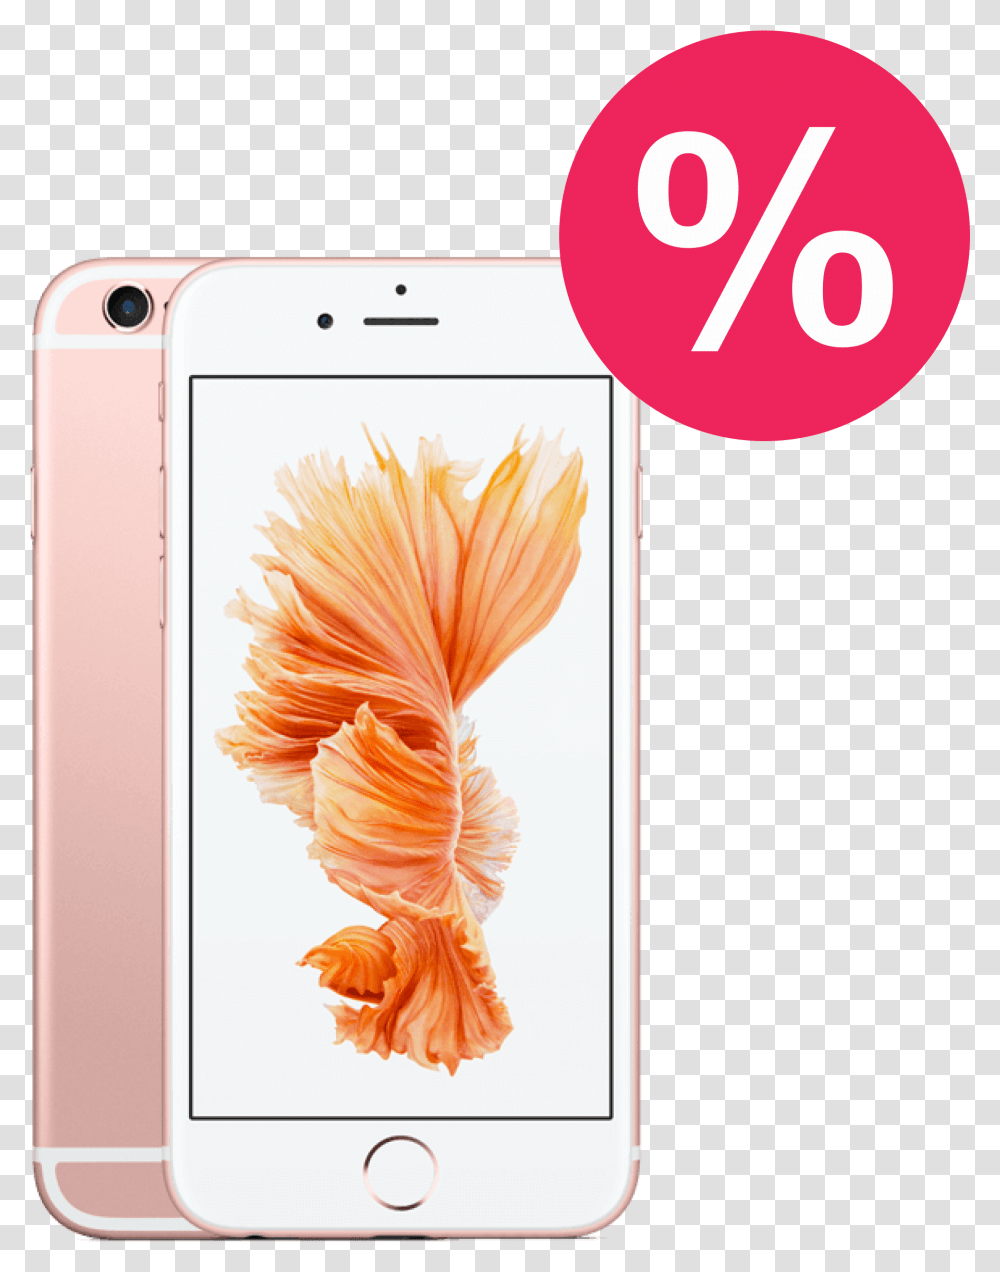 Iphone 6s Rose Gold Iphone 6s Plus Price In Sri Lanka, Mobile Phone, Electronics, Cell Phone Transparent Png